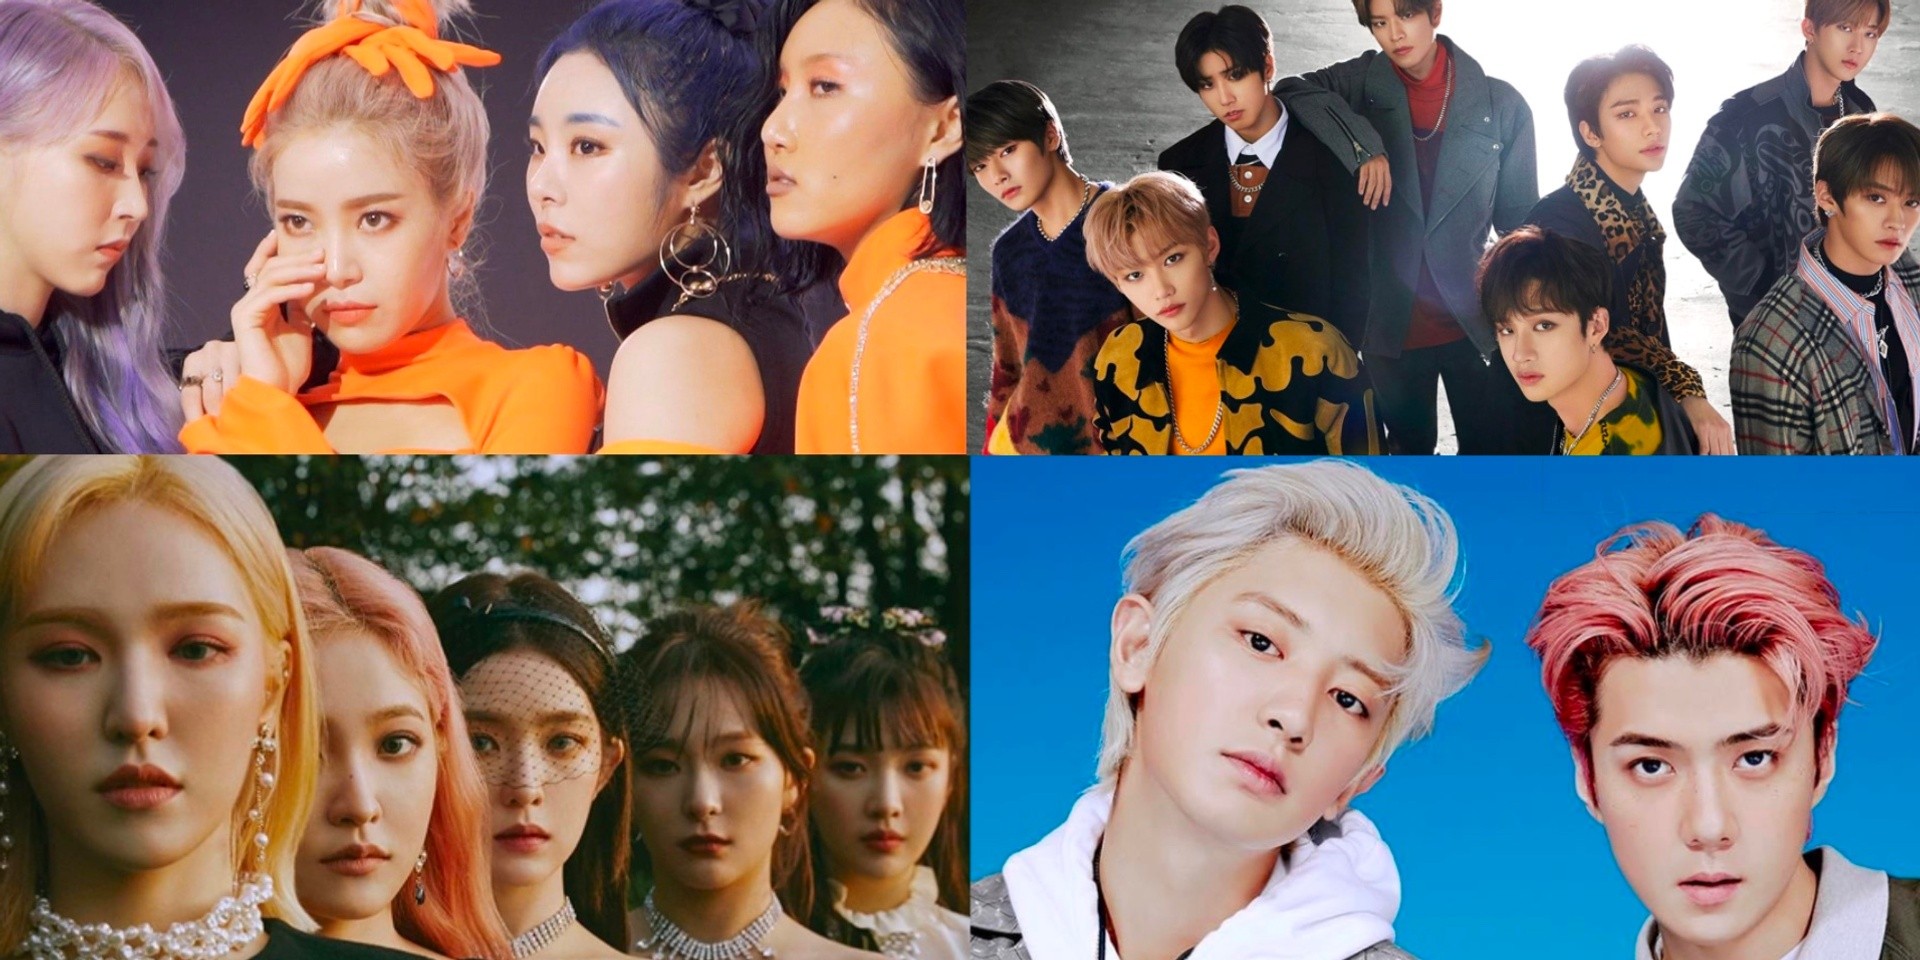 4 highlights from Dream Concert’s 'CONNECT:D' online show, featuring Red Velvet, Mamamoo, EXO-SC, and more